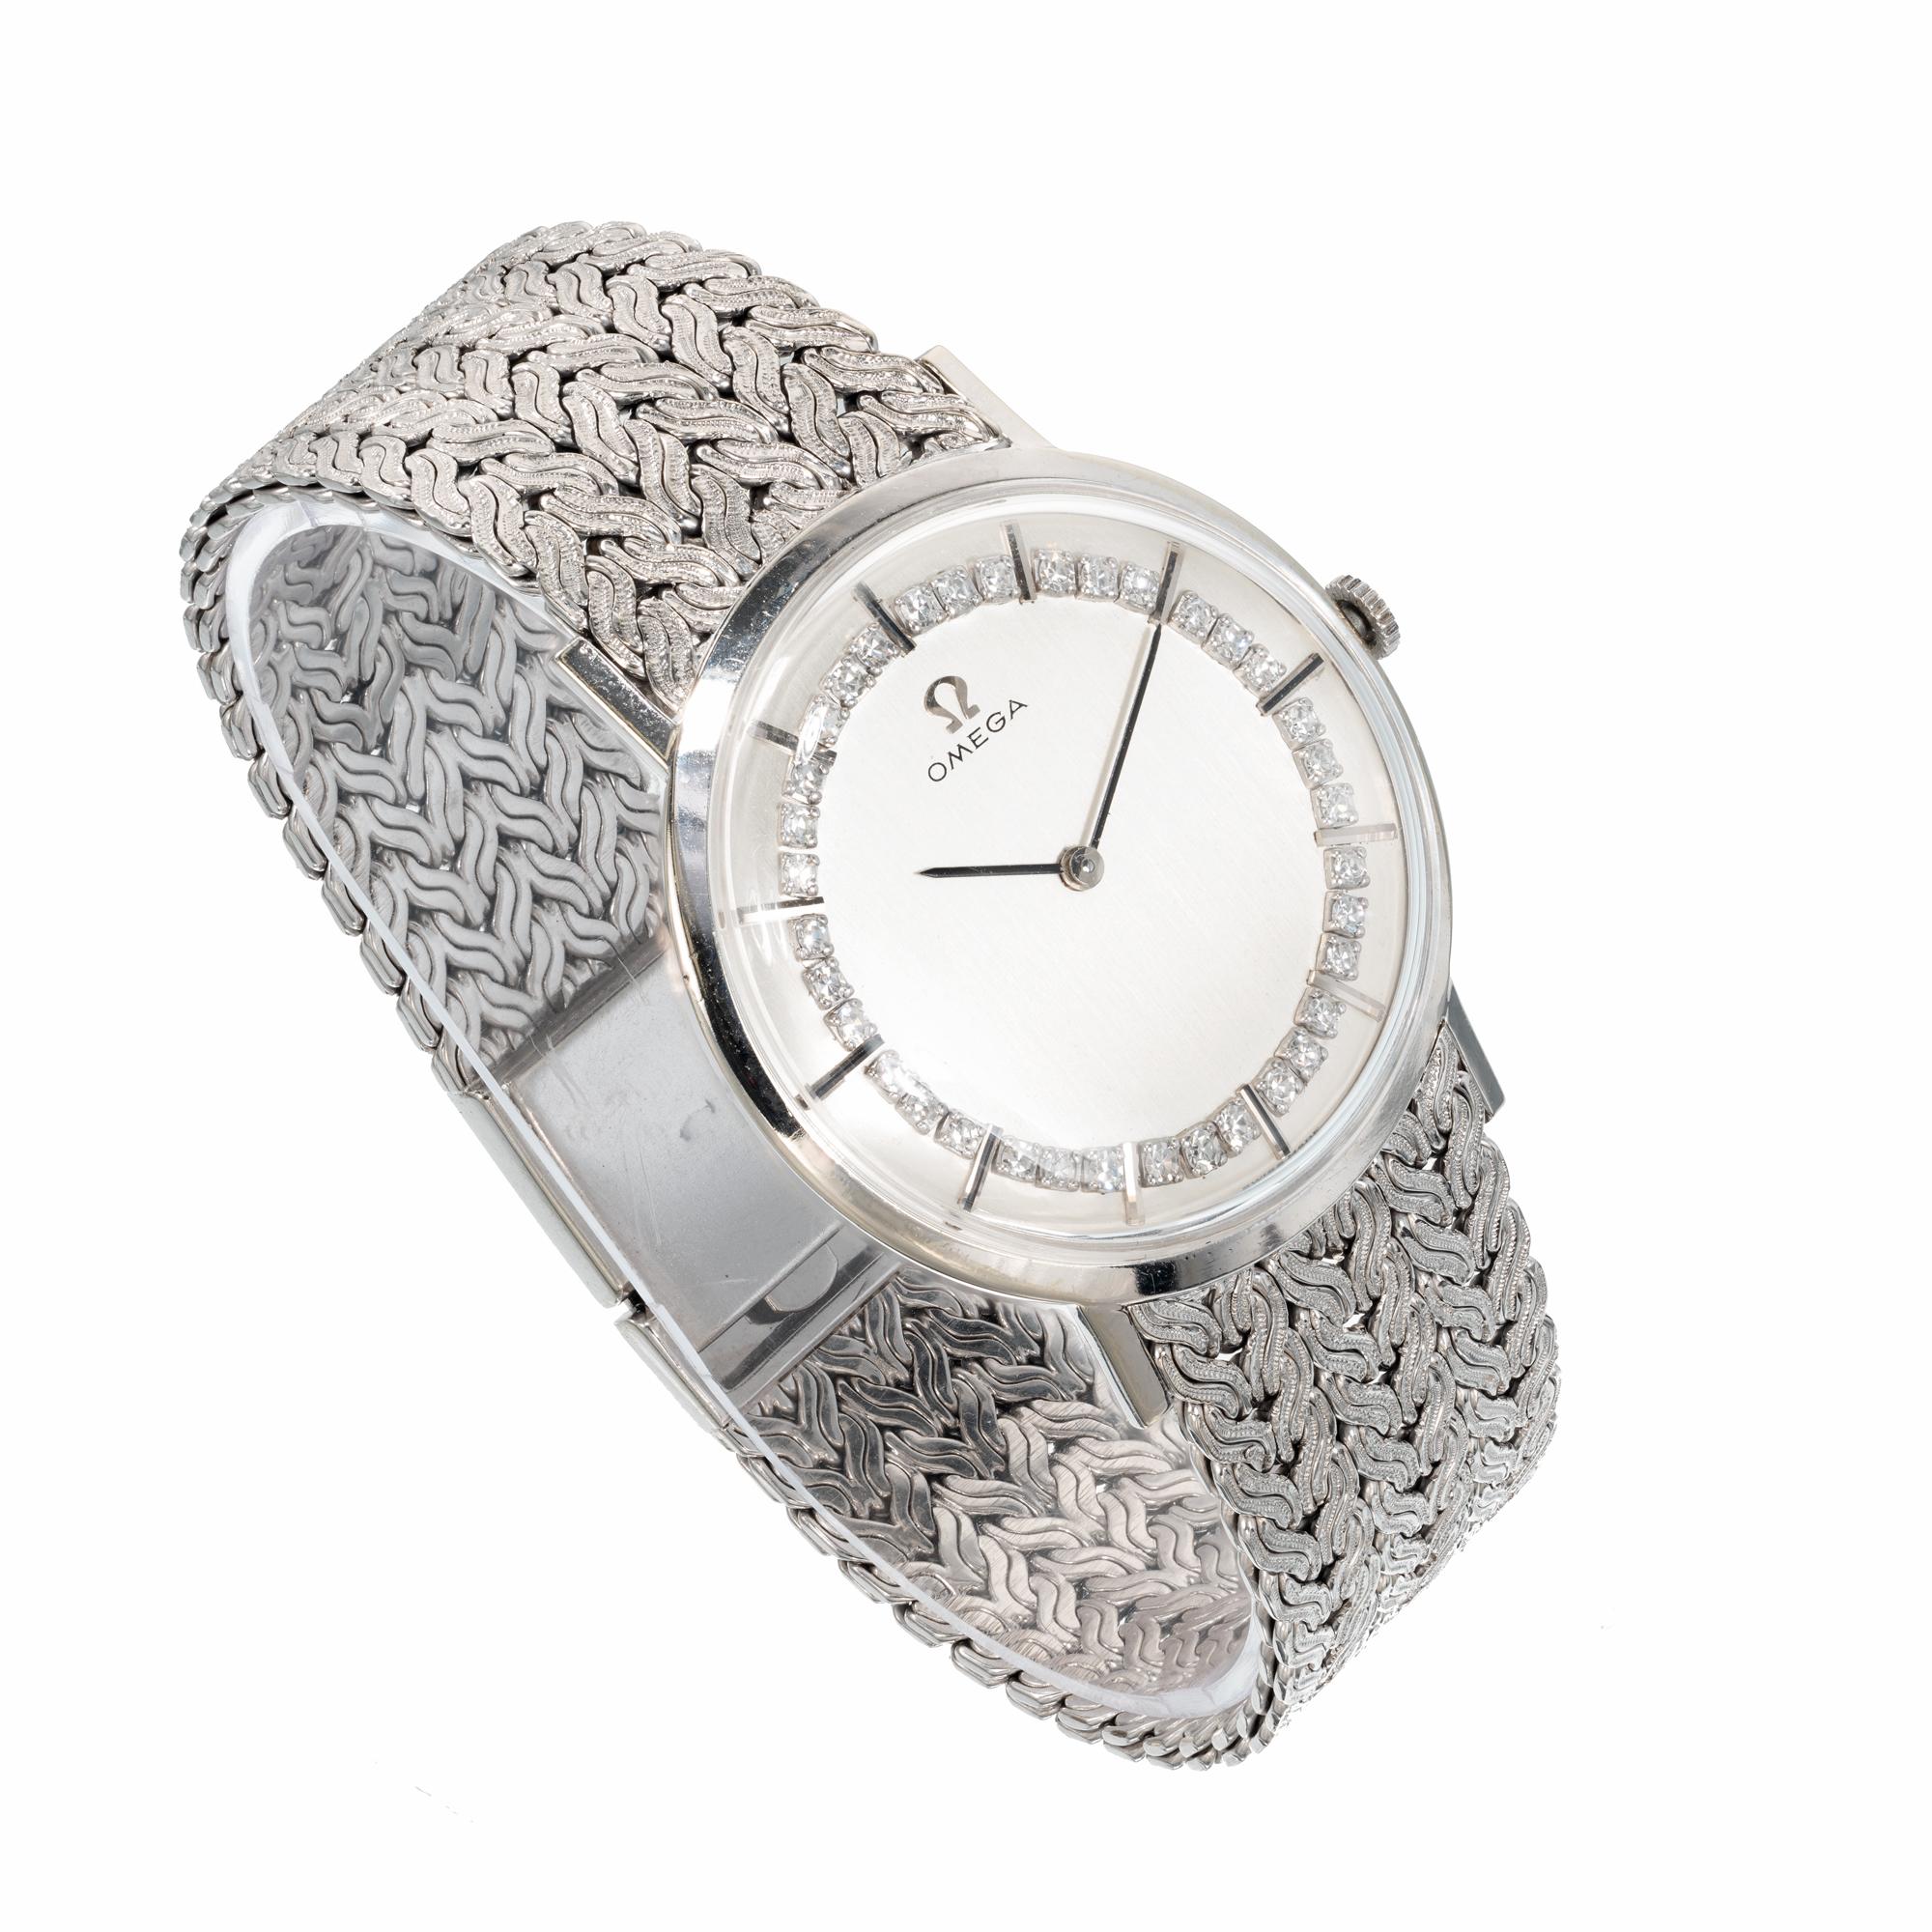 Men's or ladies Omega diamond bezel mesh band wristwatch. Vintage 1960's Omega with a diamond bezel and white gold mesh band. Suitable style and size wise for a man or ladies watch. Can be shortened or lengthened by a professional jeweler. All